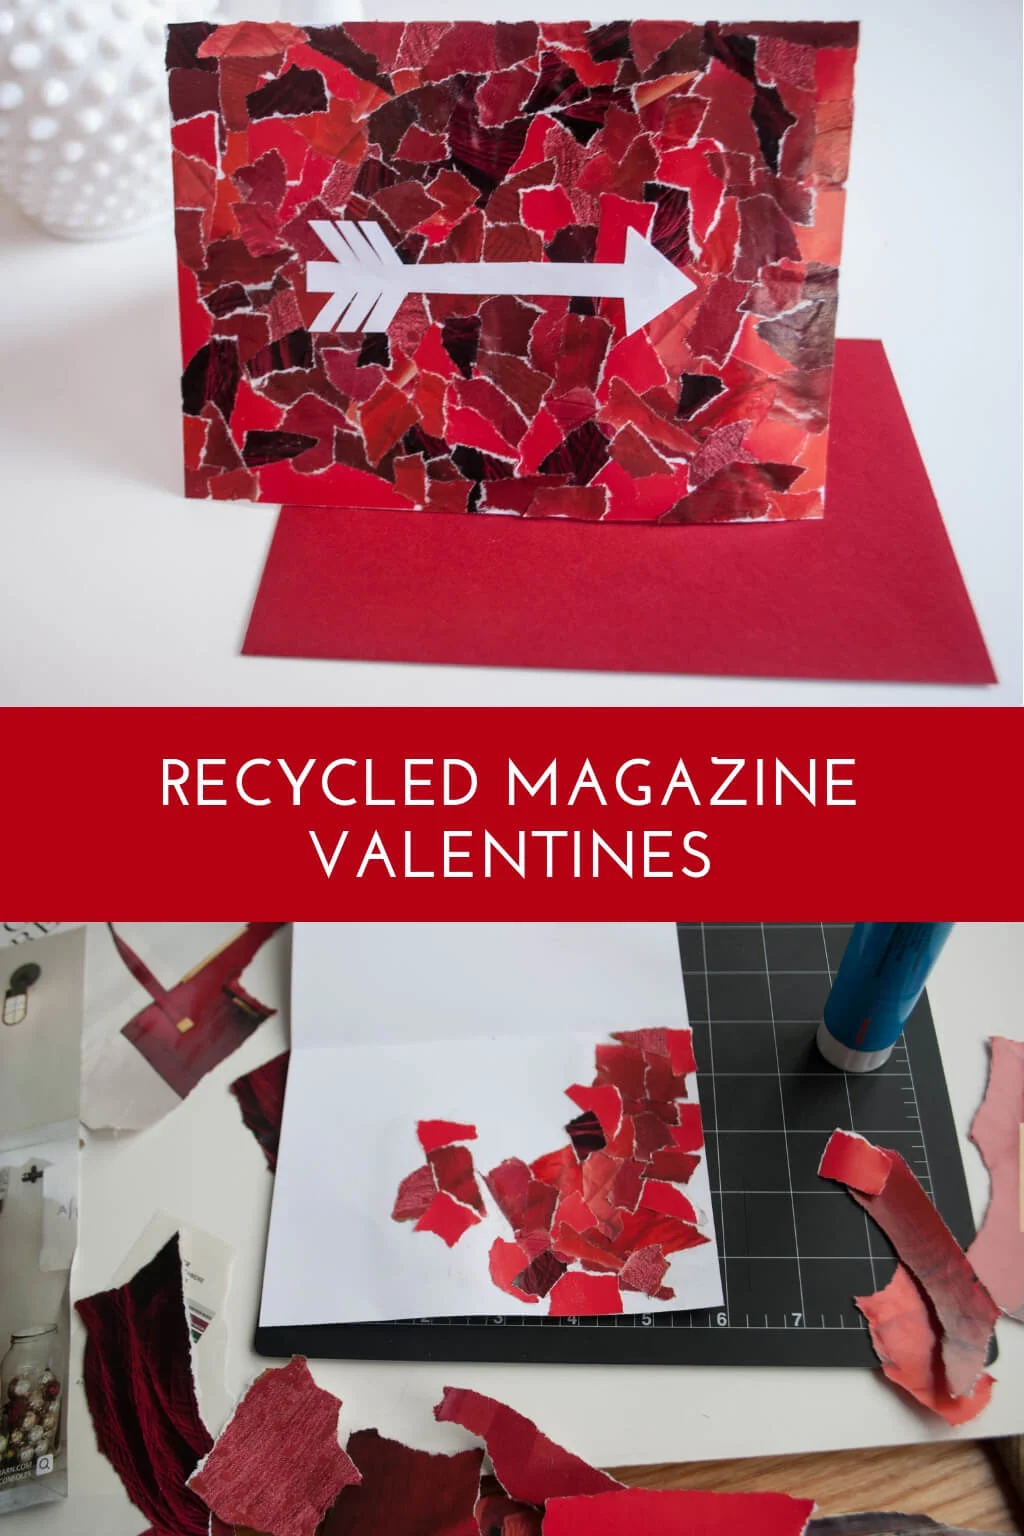 Recycled magazine card for Valentine's Day